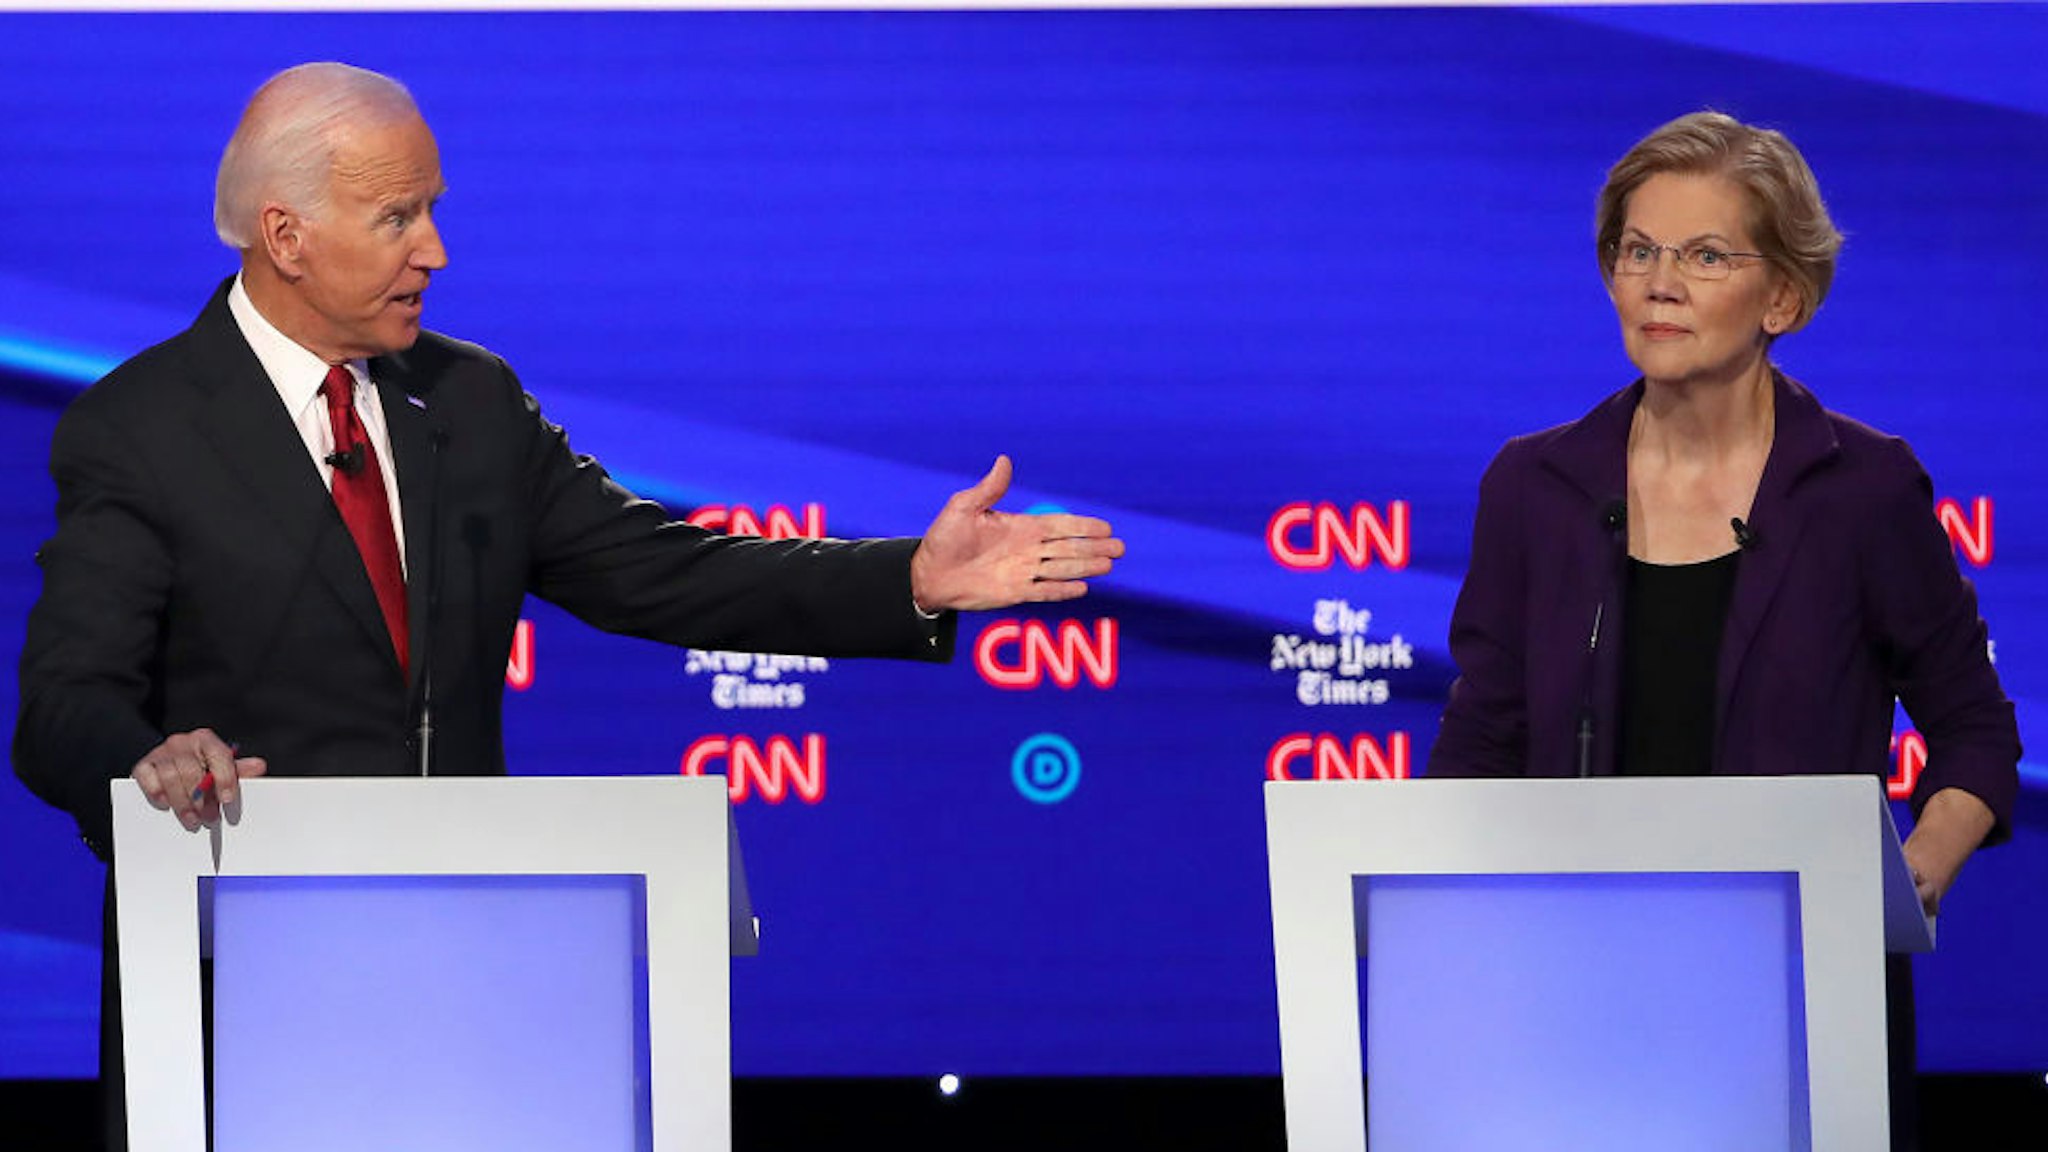 Former Vice President Joe Biden challenges Sen. Elizabeth Warren (D-MA) during the Democratic Presidential Debate at Otterbein University on October 15, 2019 in Westerville, Ohio. A record 12 presidential hopefuls are participating in the debate hosted by CNN and The New York Times. (Photo by Win McNamee/Getty Images)